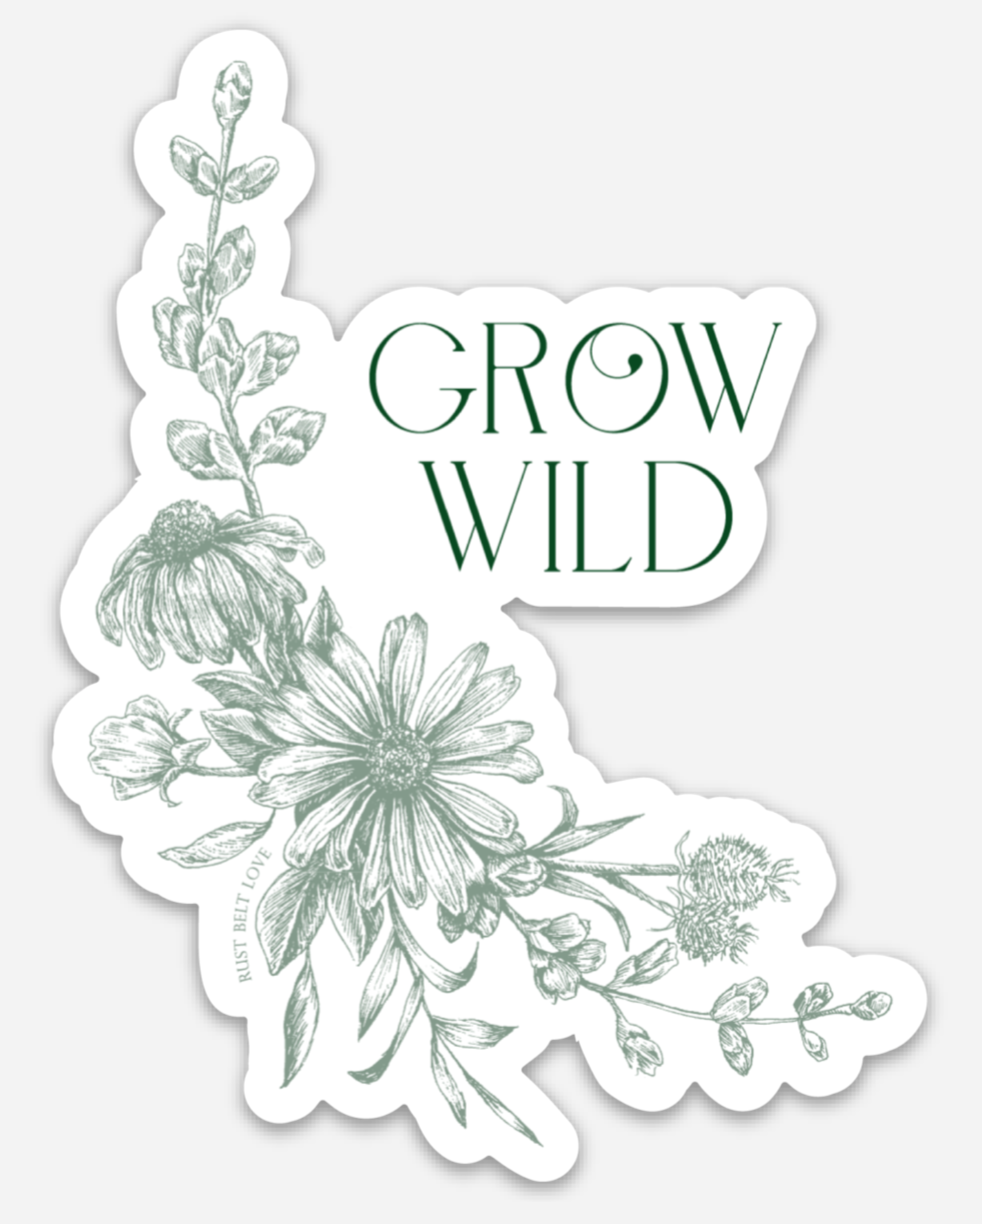 Green floral sticker that says "Grow wild" by Rust Belt Love